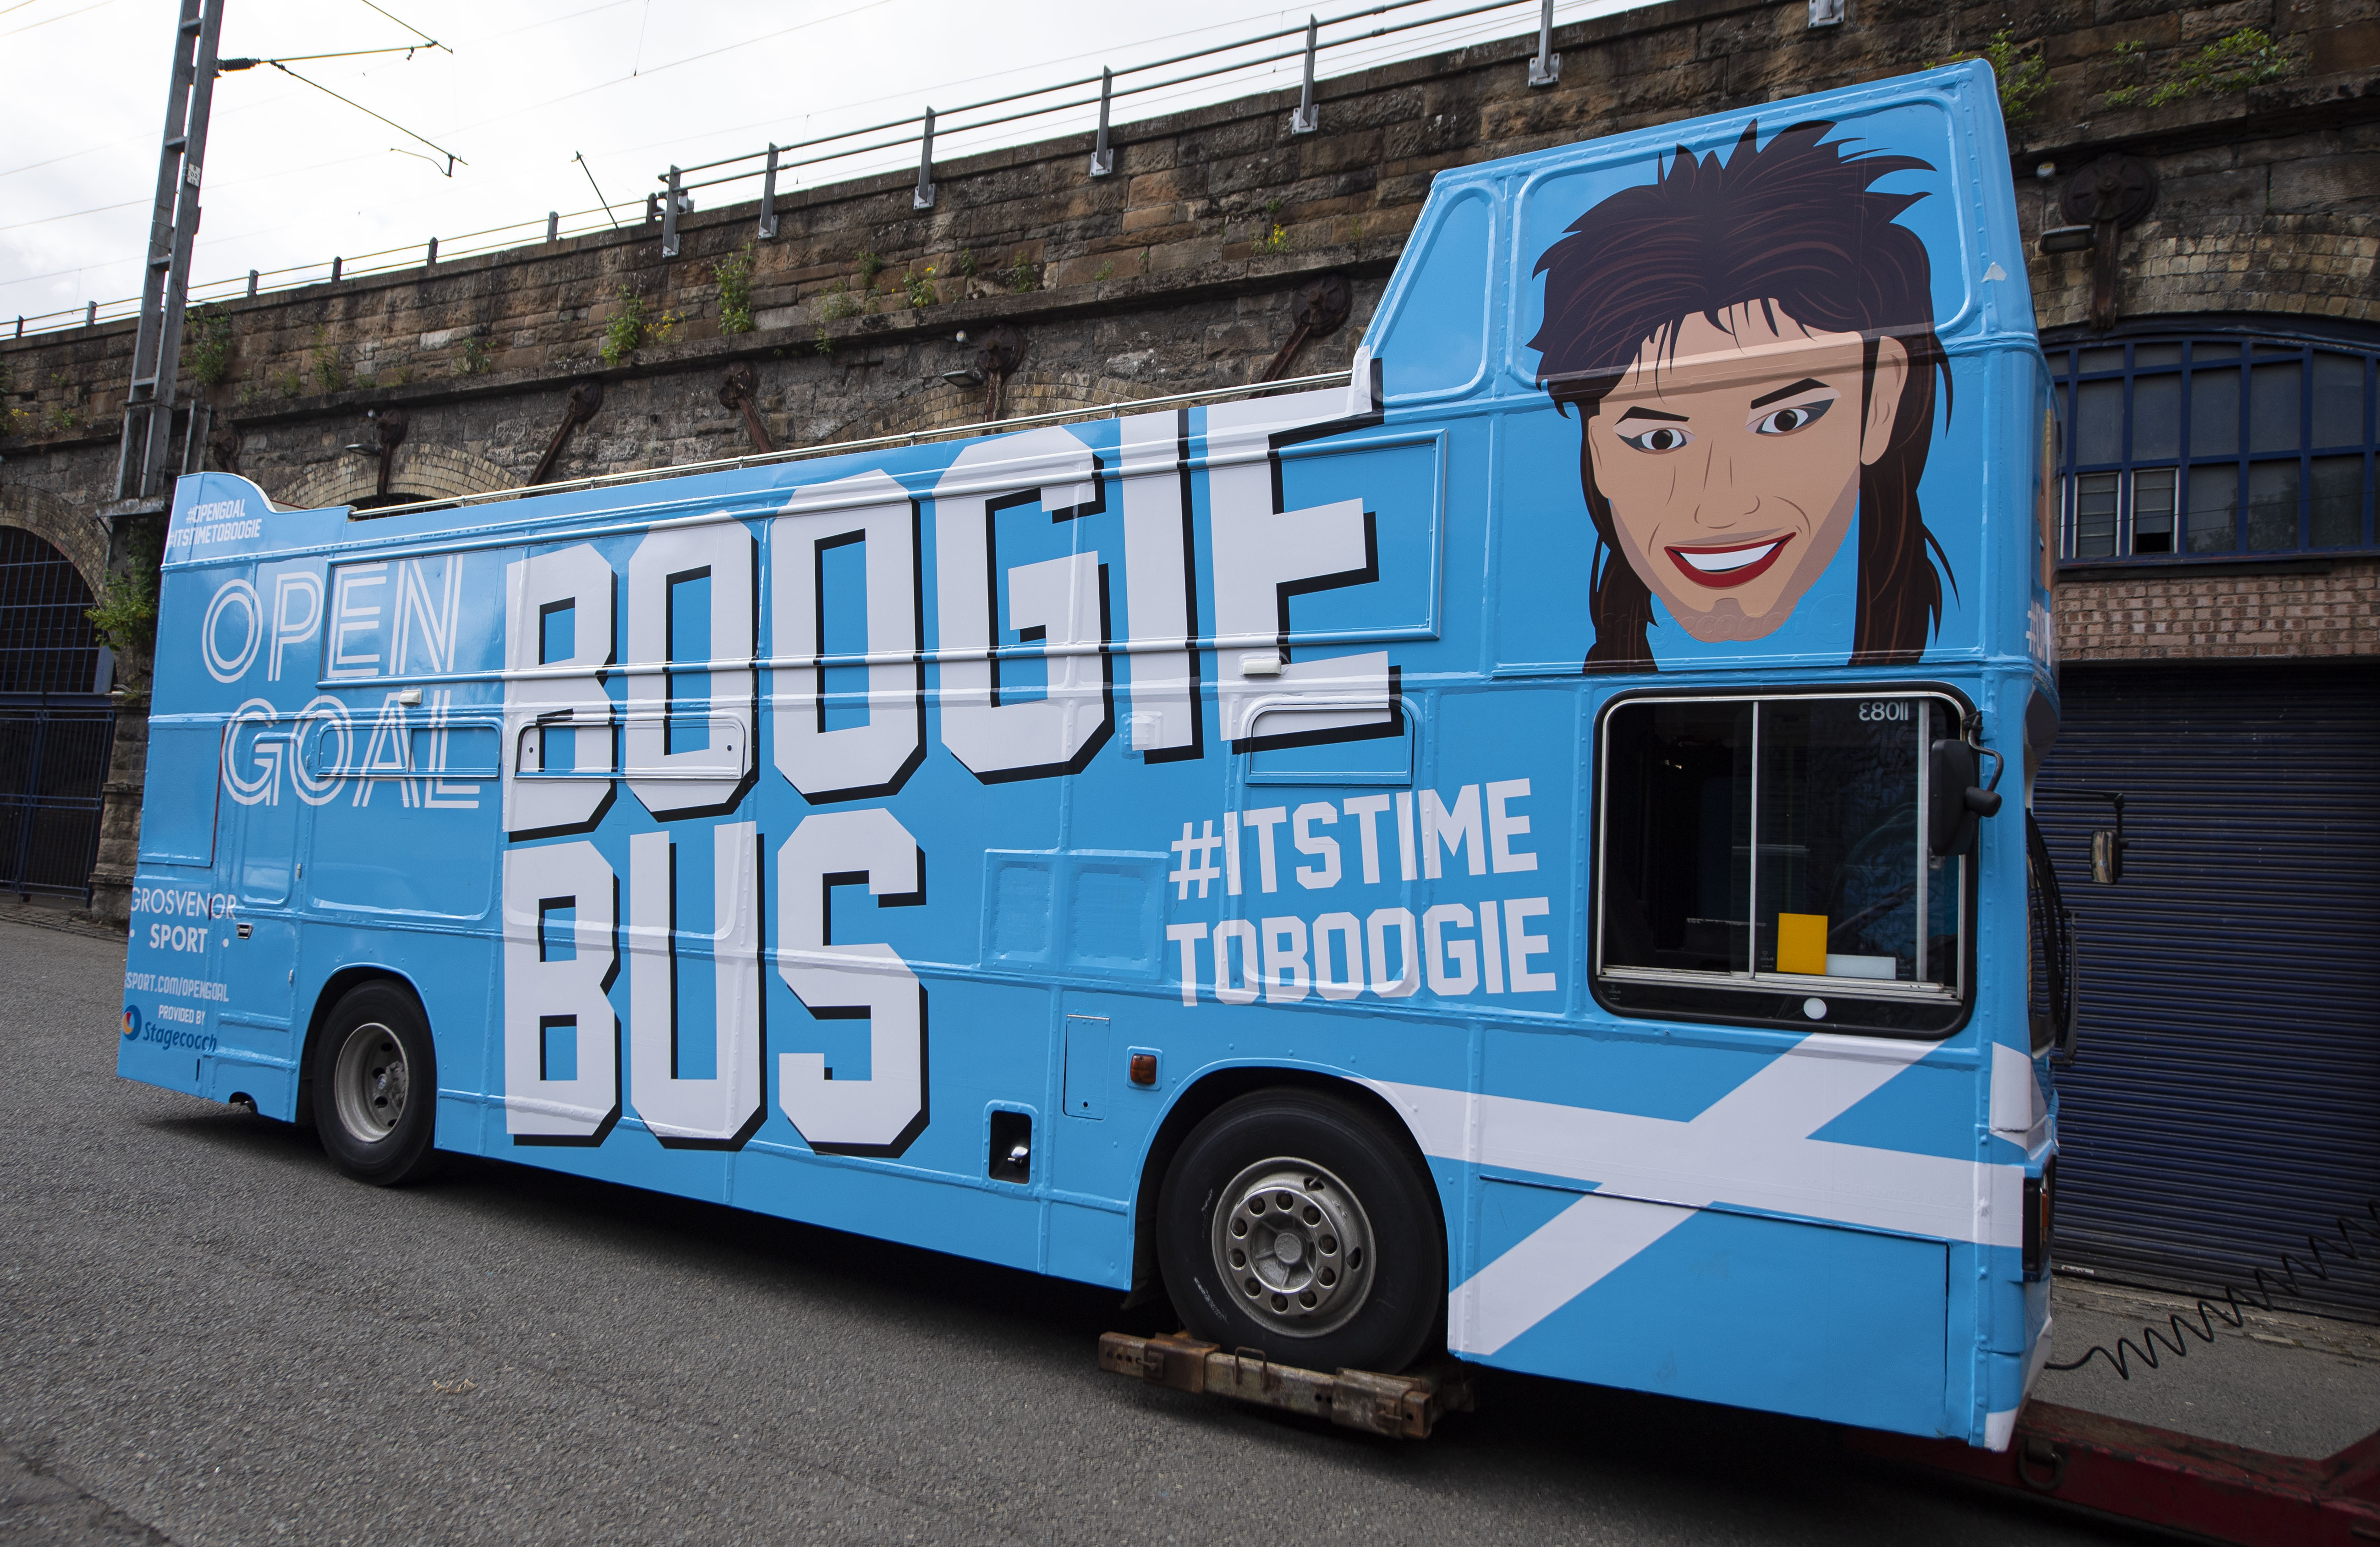 The Open Goal podcast's Boogie Bus was out on the streets of Glasgow.